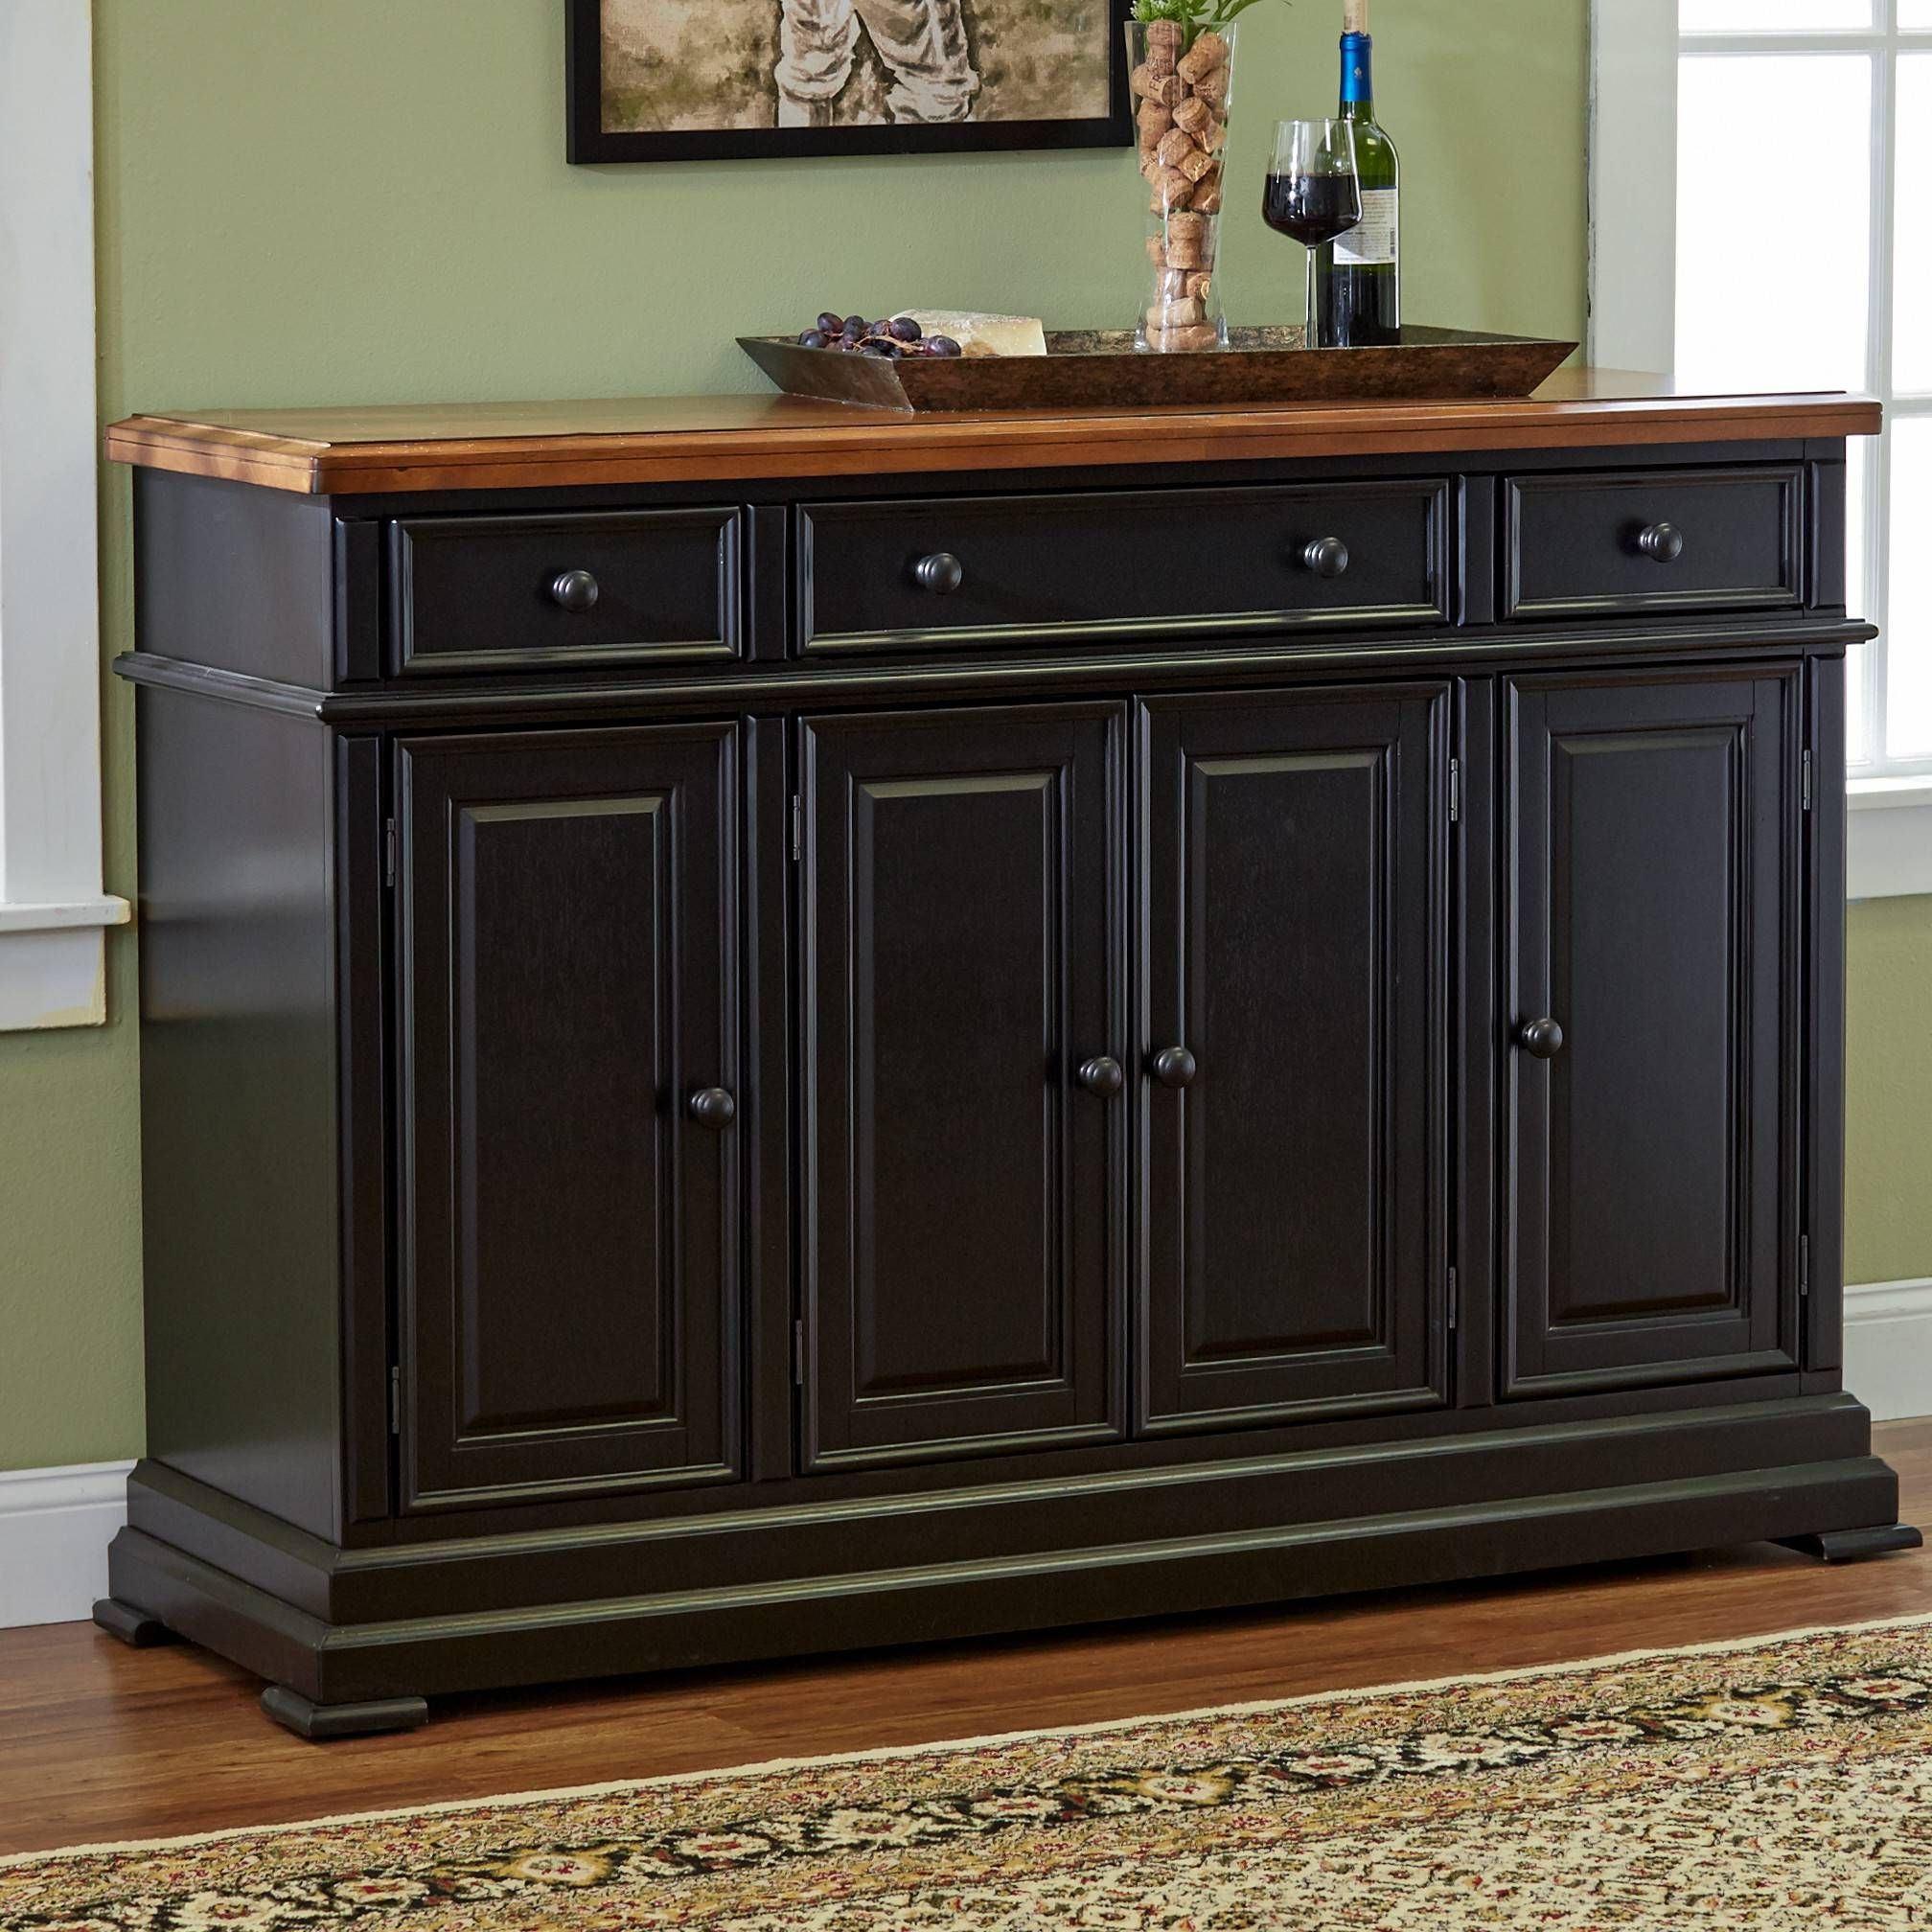 Beautiful Sideboards And Servers Bjdgjy Pertaining To Dining Room Servers And Sideboards 